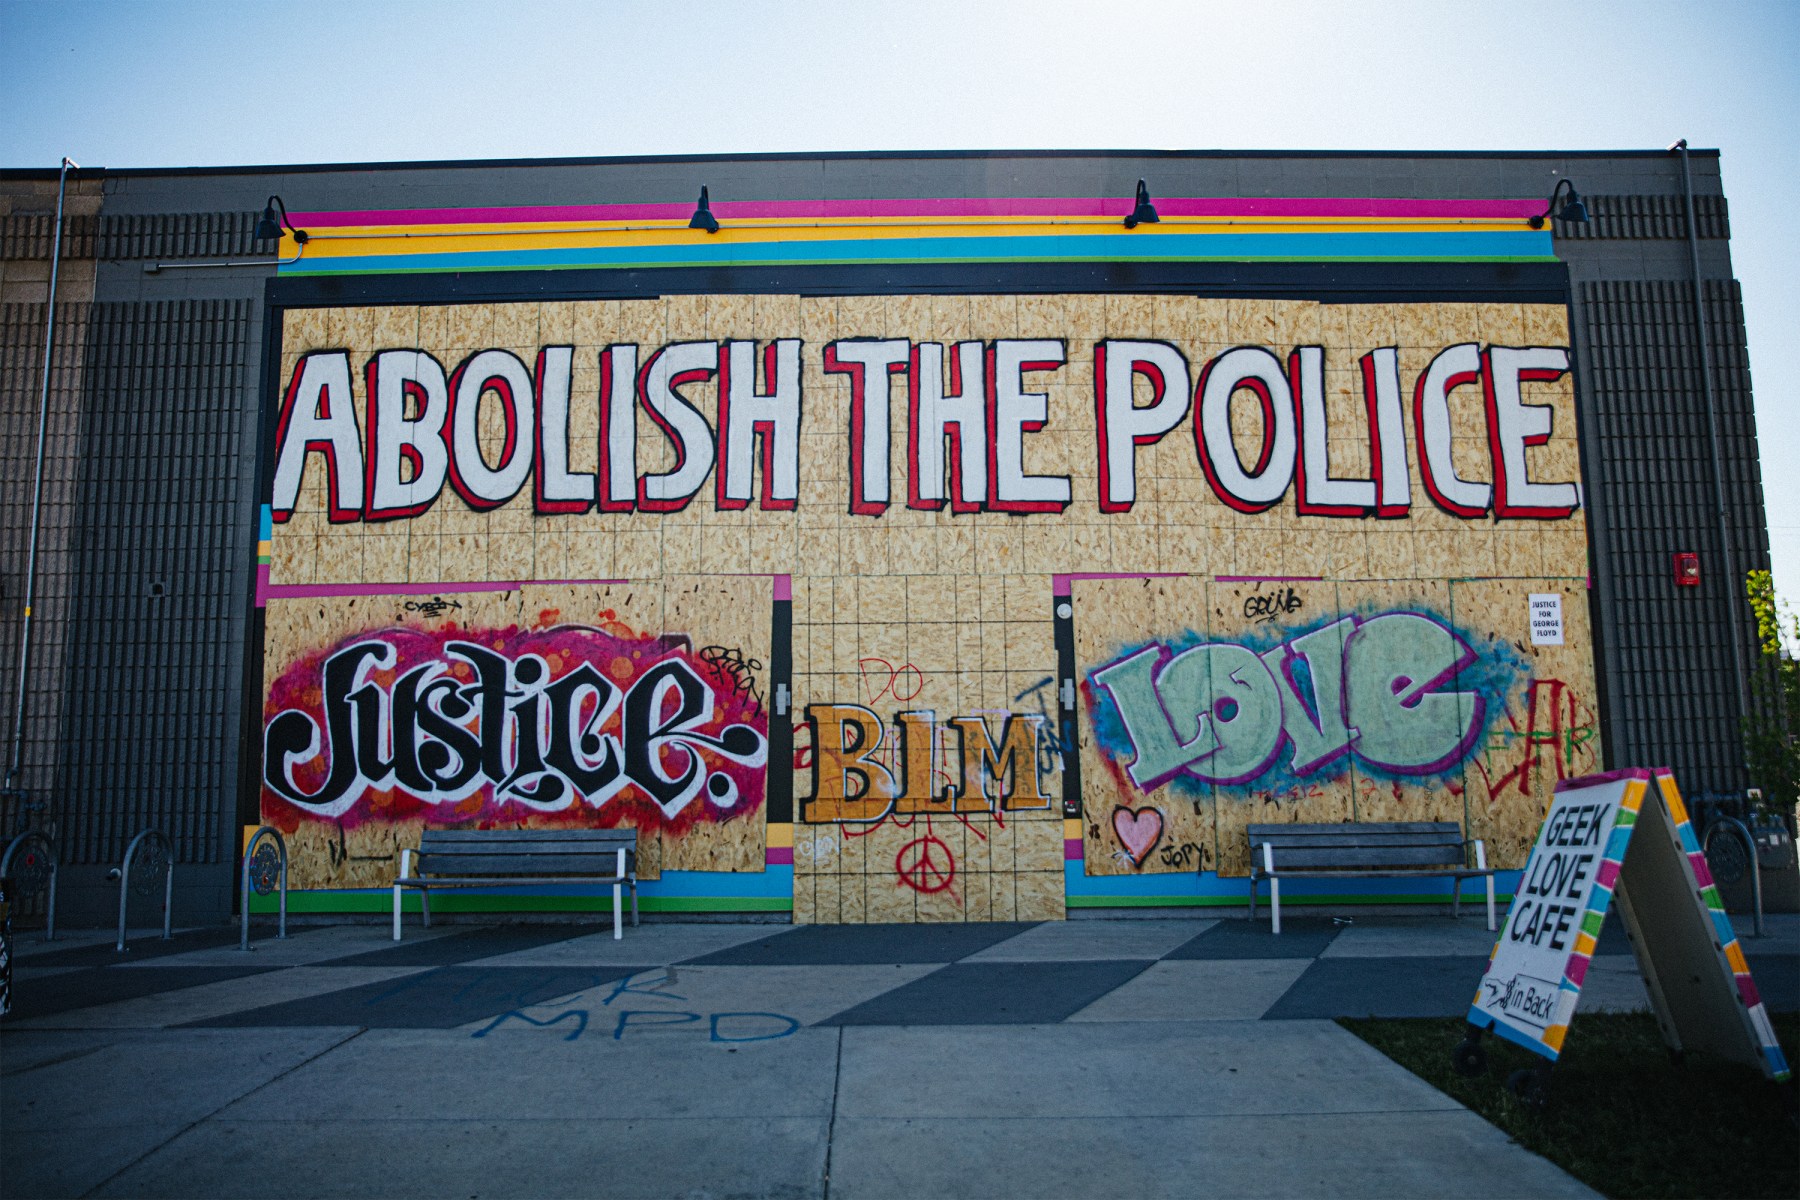 Much of the art centers around police reform, ranging from abolishing to reallocating funds. 